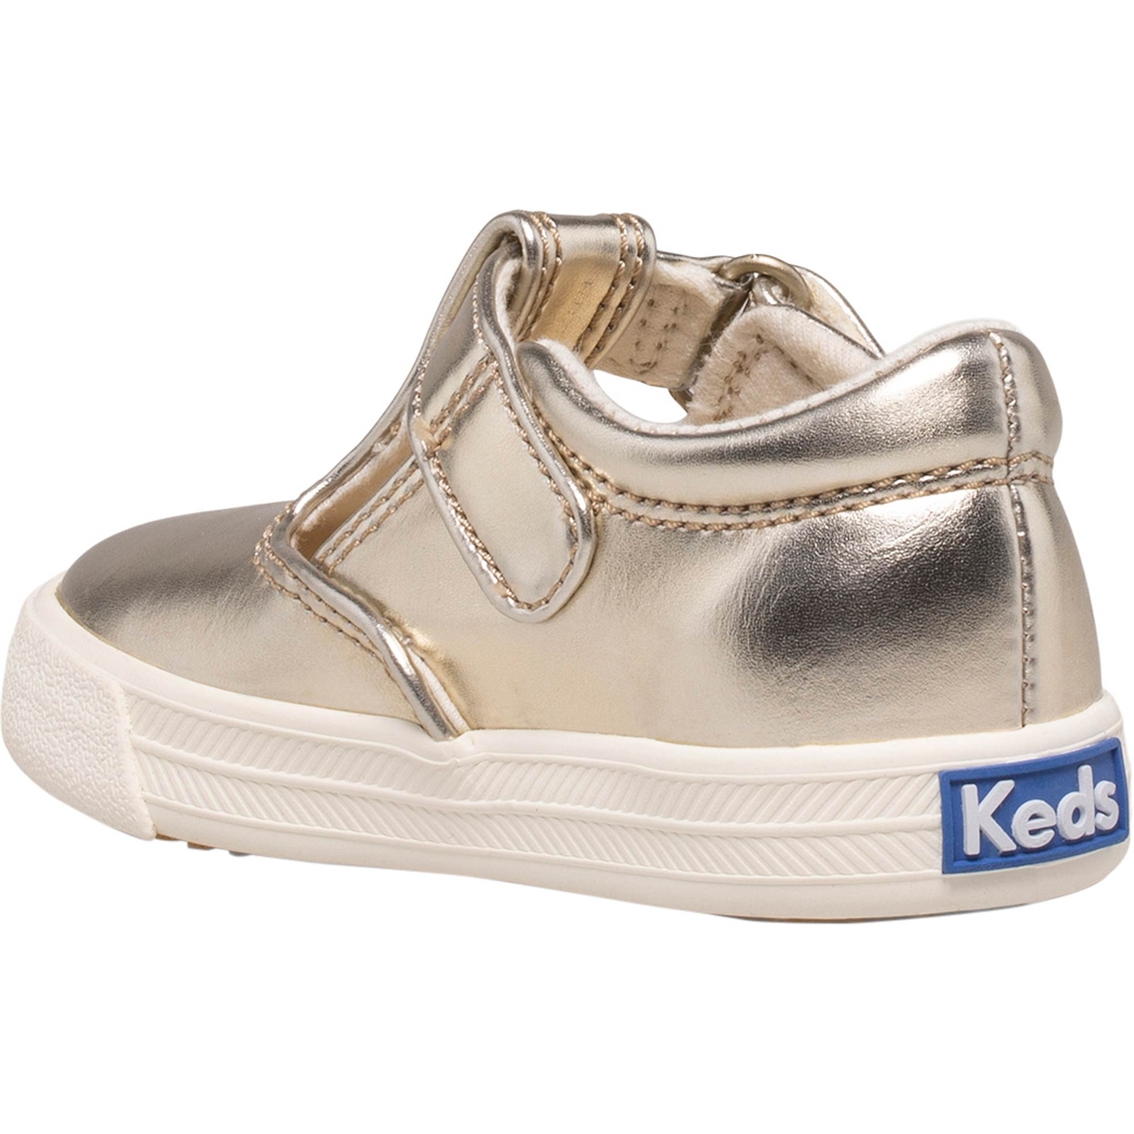 Keds Girls Daphne T Strap Sneakers - Image 3 of 5